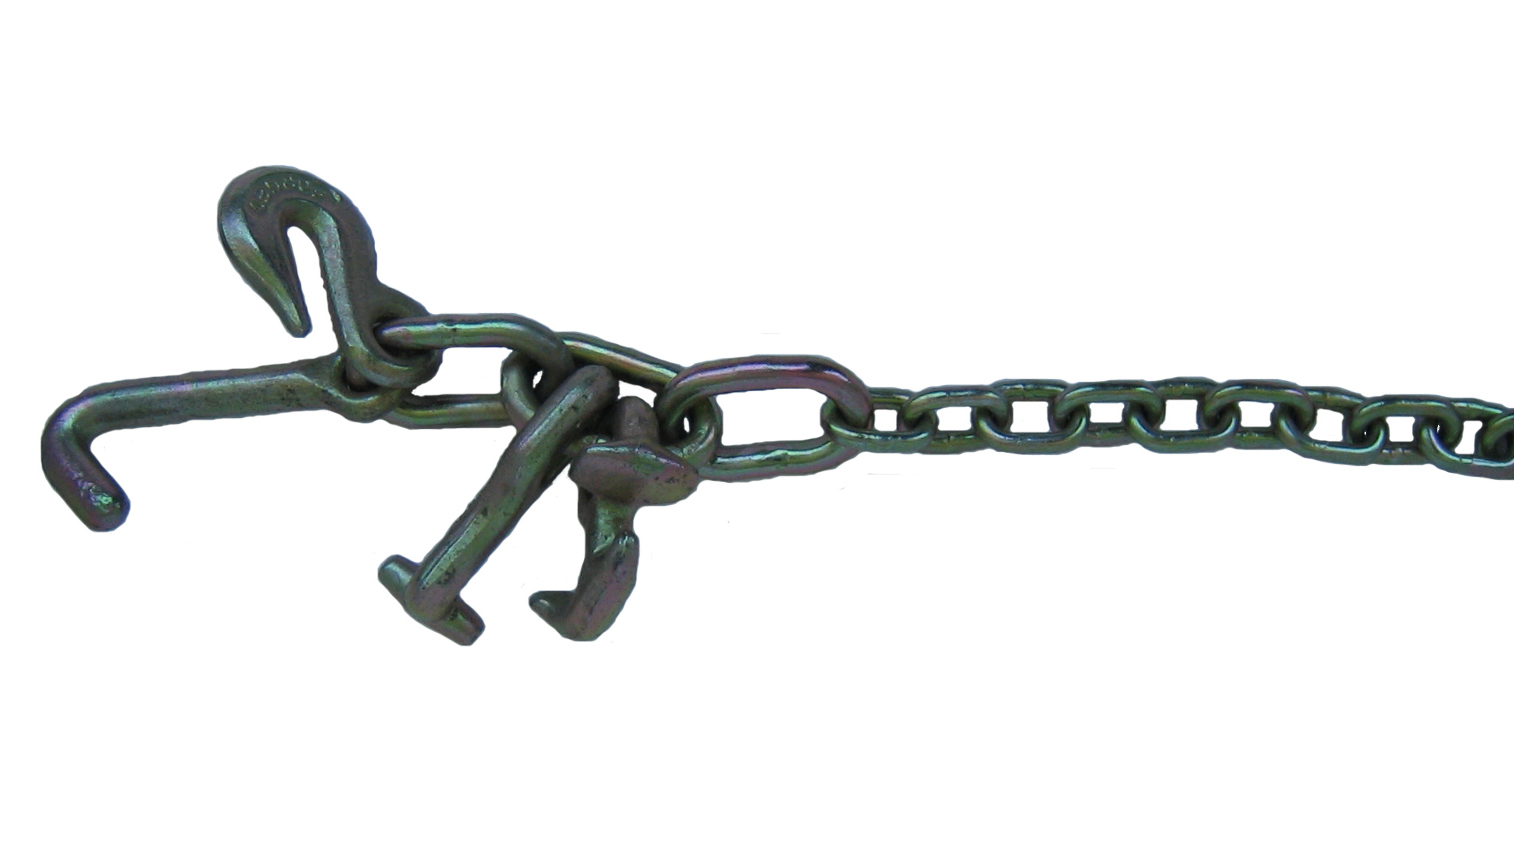 5/16″ x 4 FT G70 Transport Chain w/- RTJG Cluster Hook – CTS CARGO